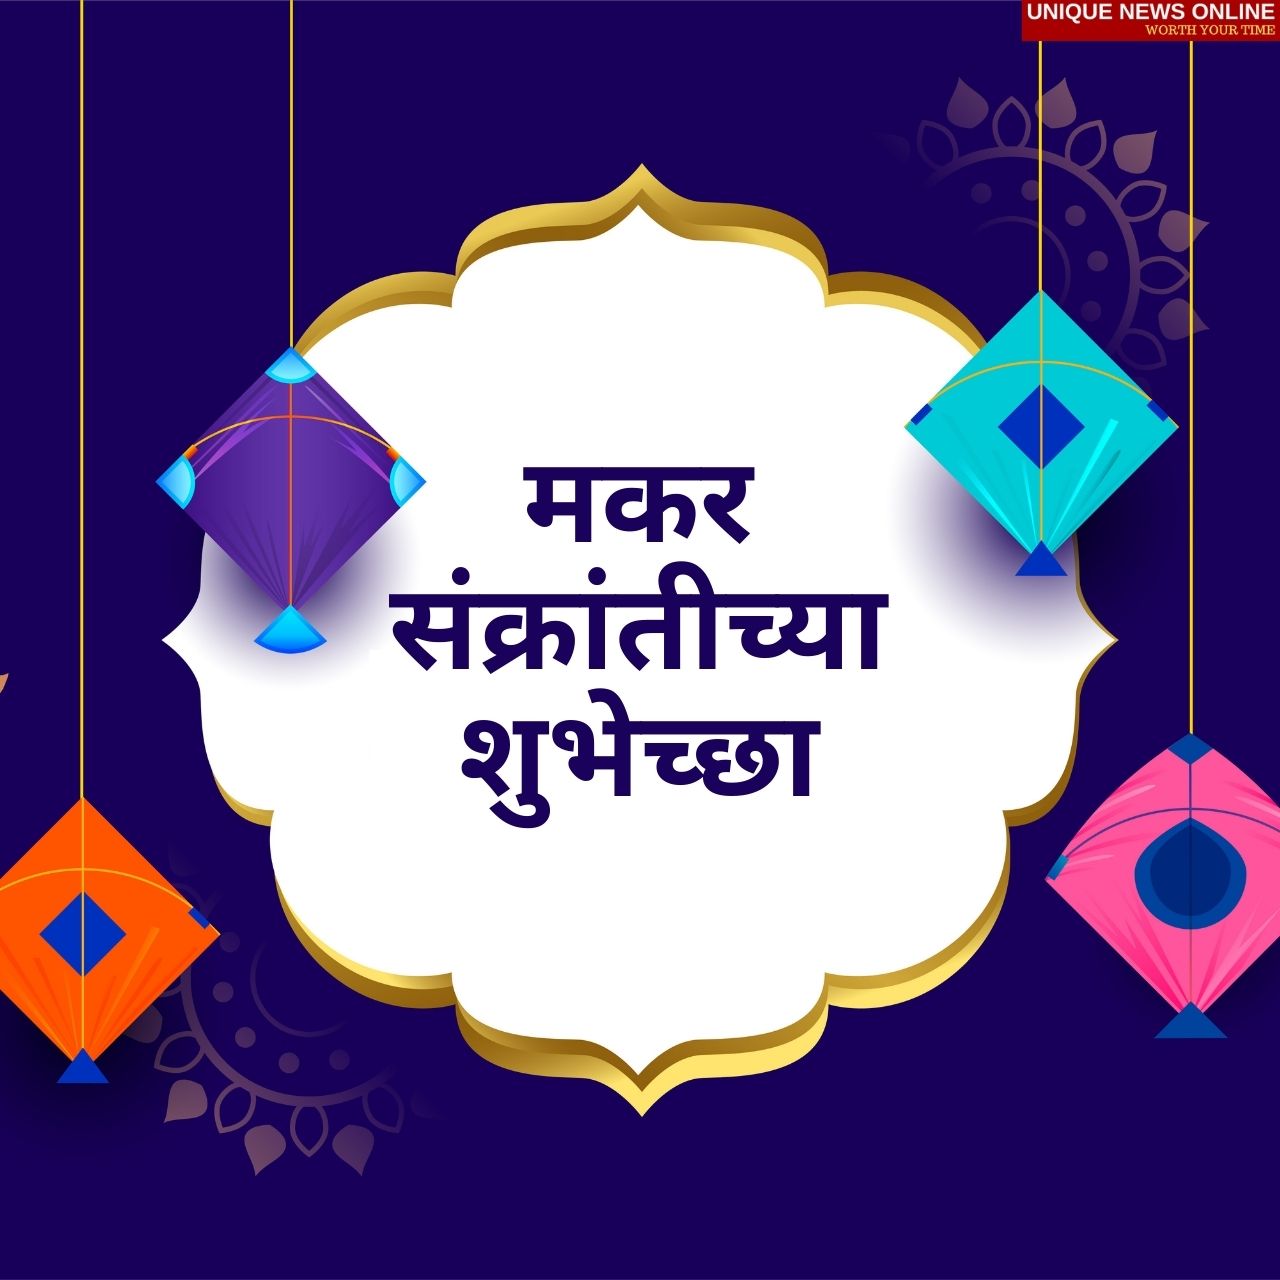 Makar Sankranti 2022: Marathi Wishes, Quotes, HD Images, Messages, Greetings, Shayari, Status to greet your Loved Ones